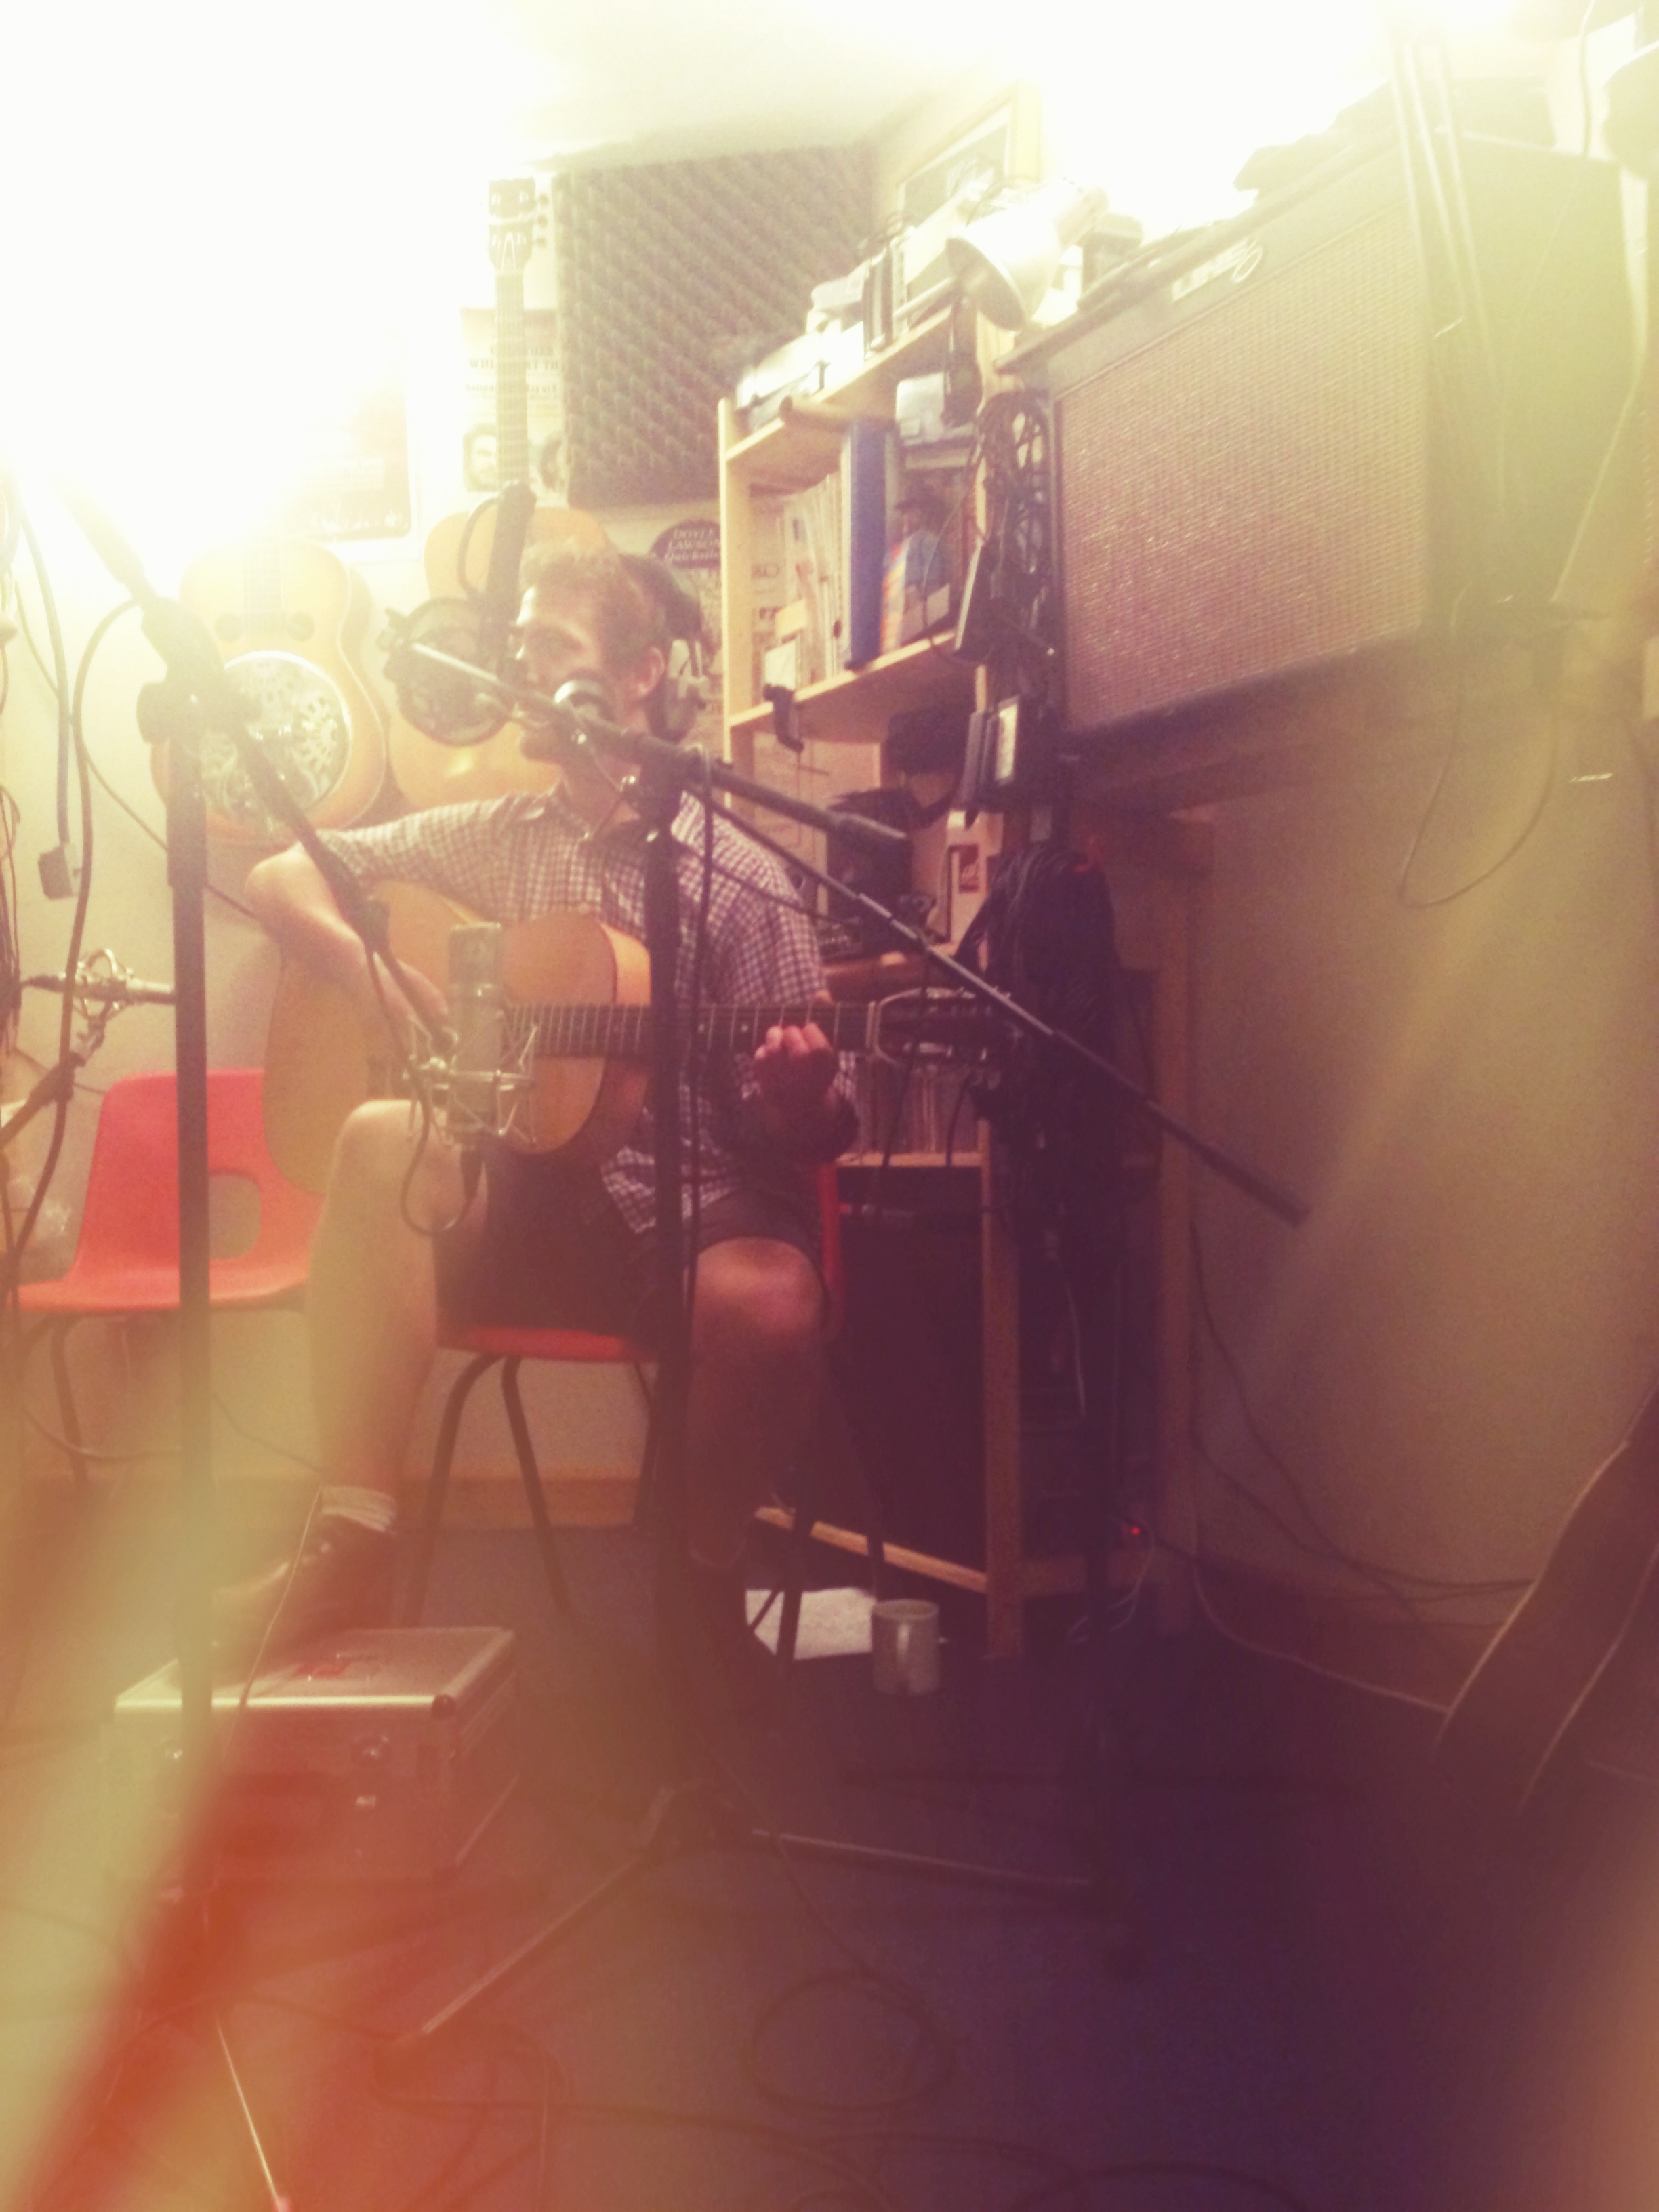 Tim in the recording booth